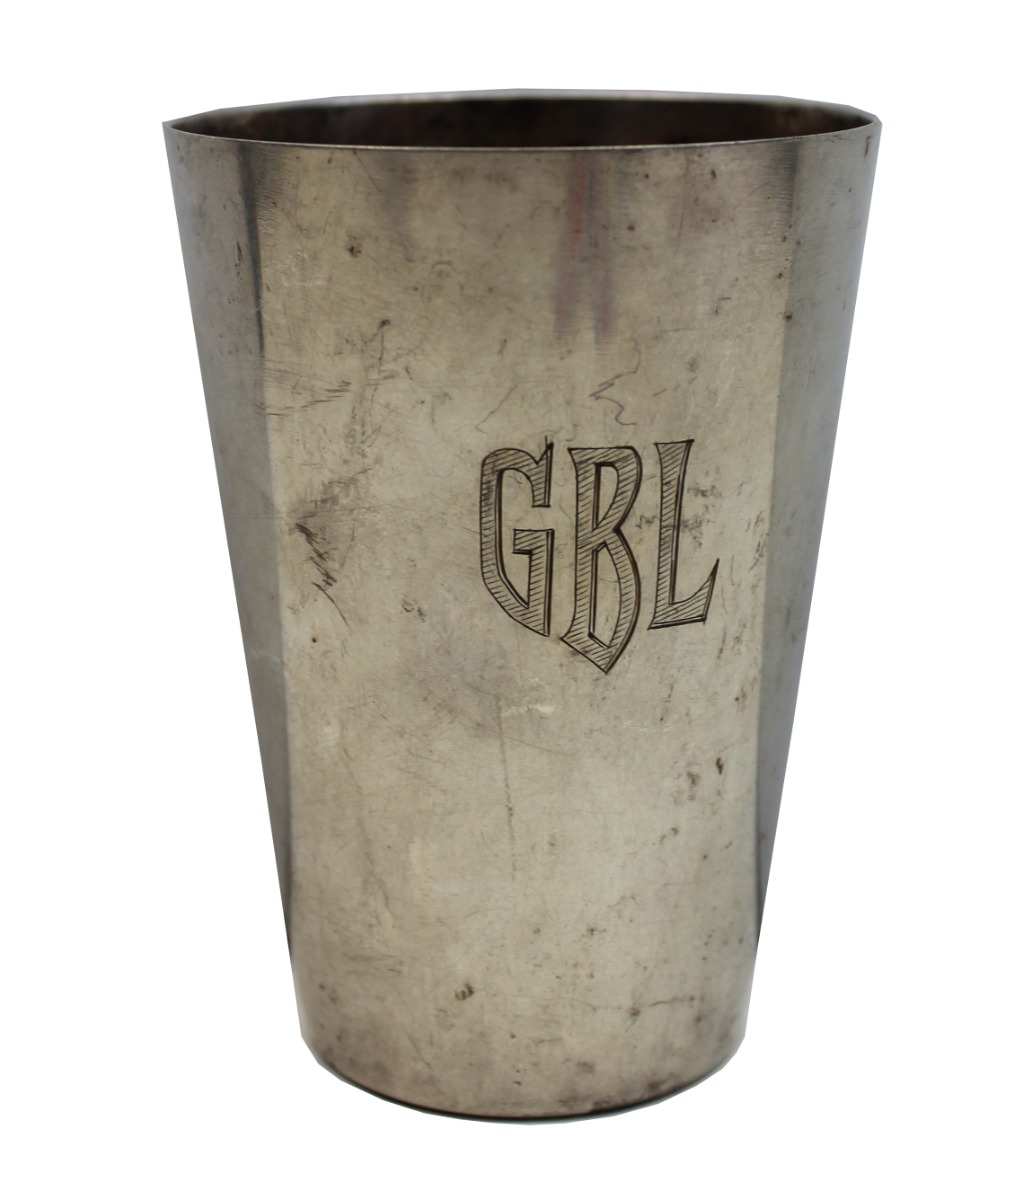 SS REICH SILVER DRINKING CUP